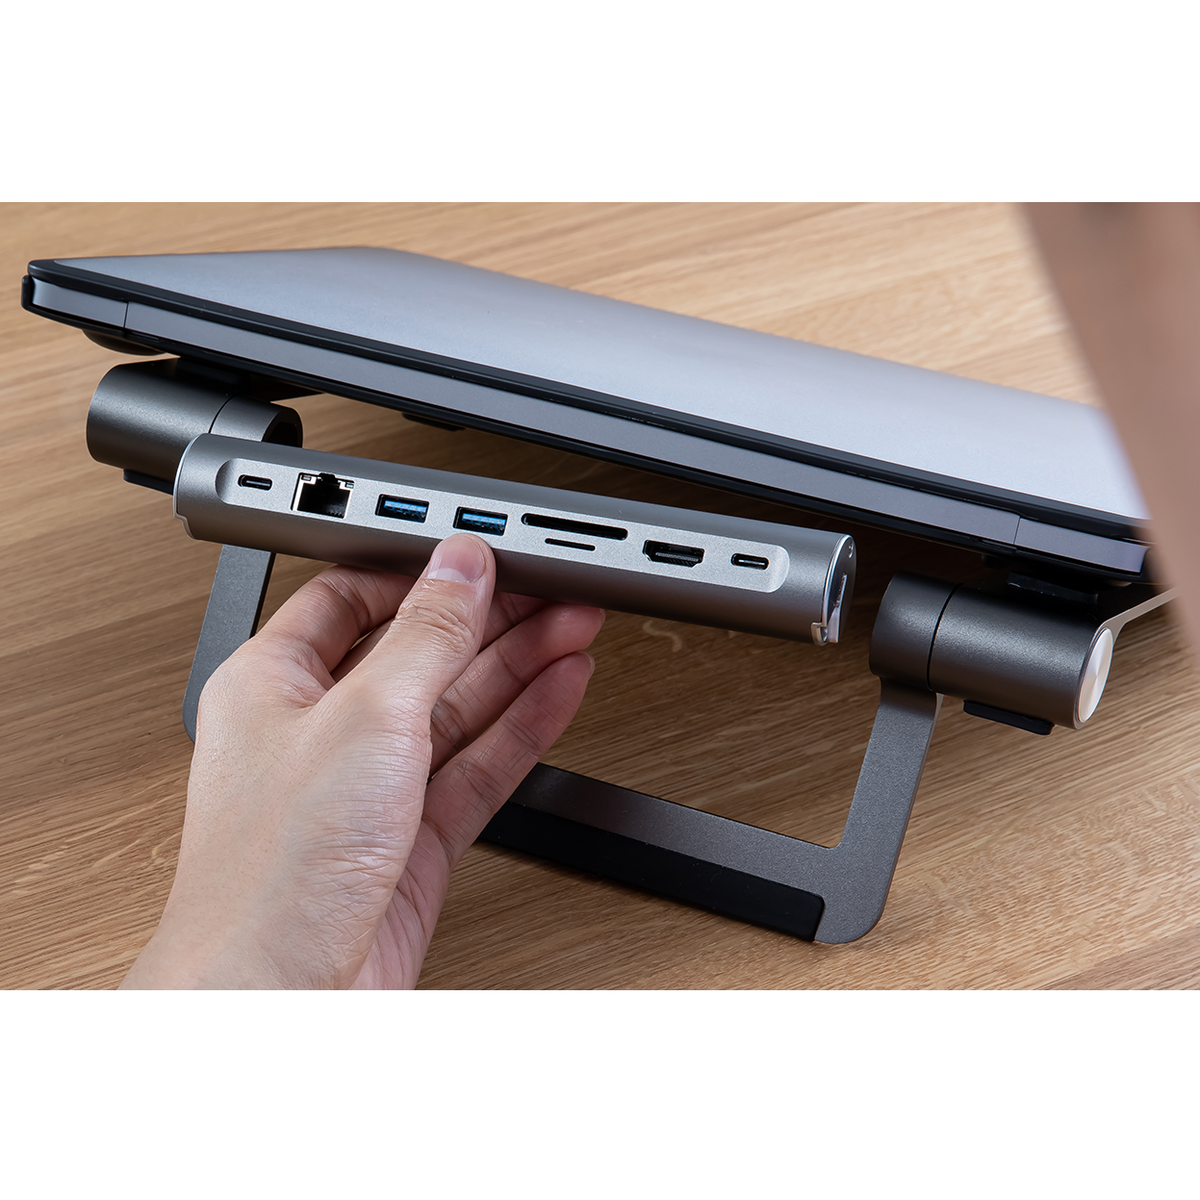 Epico 8in1 USB-C Multiport Hub with Multifunctional Stand - Space Gray | 9915111900082 from Epico - DID Electrical